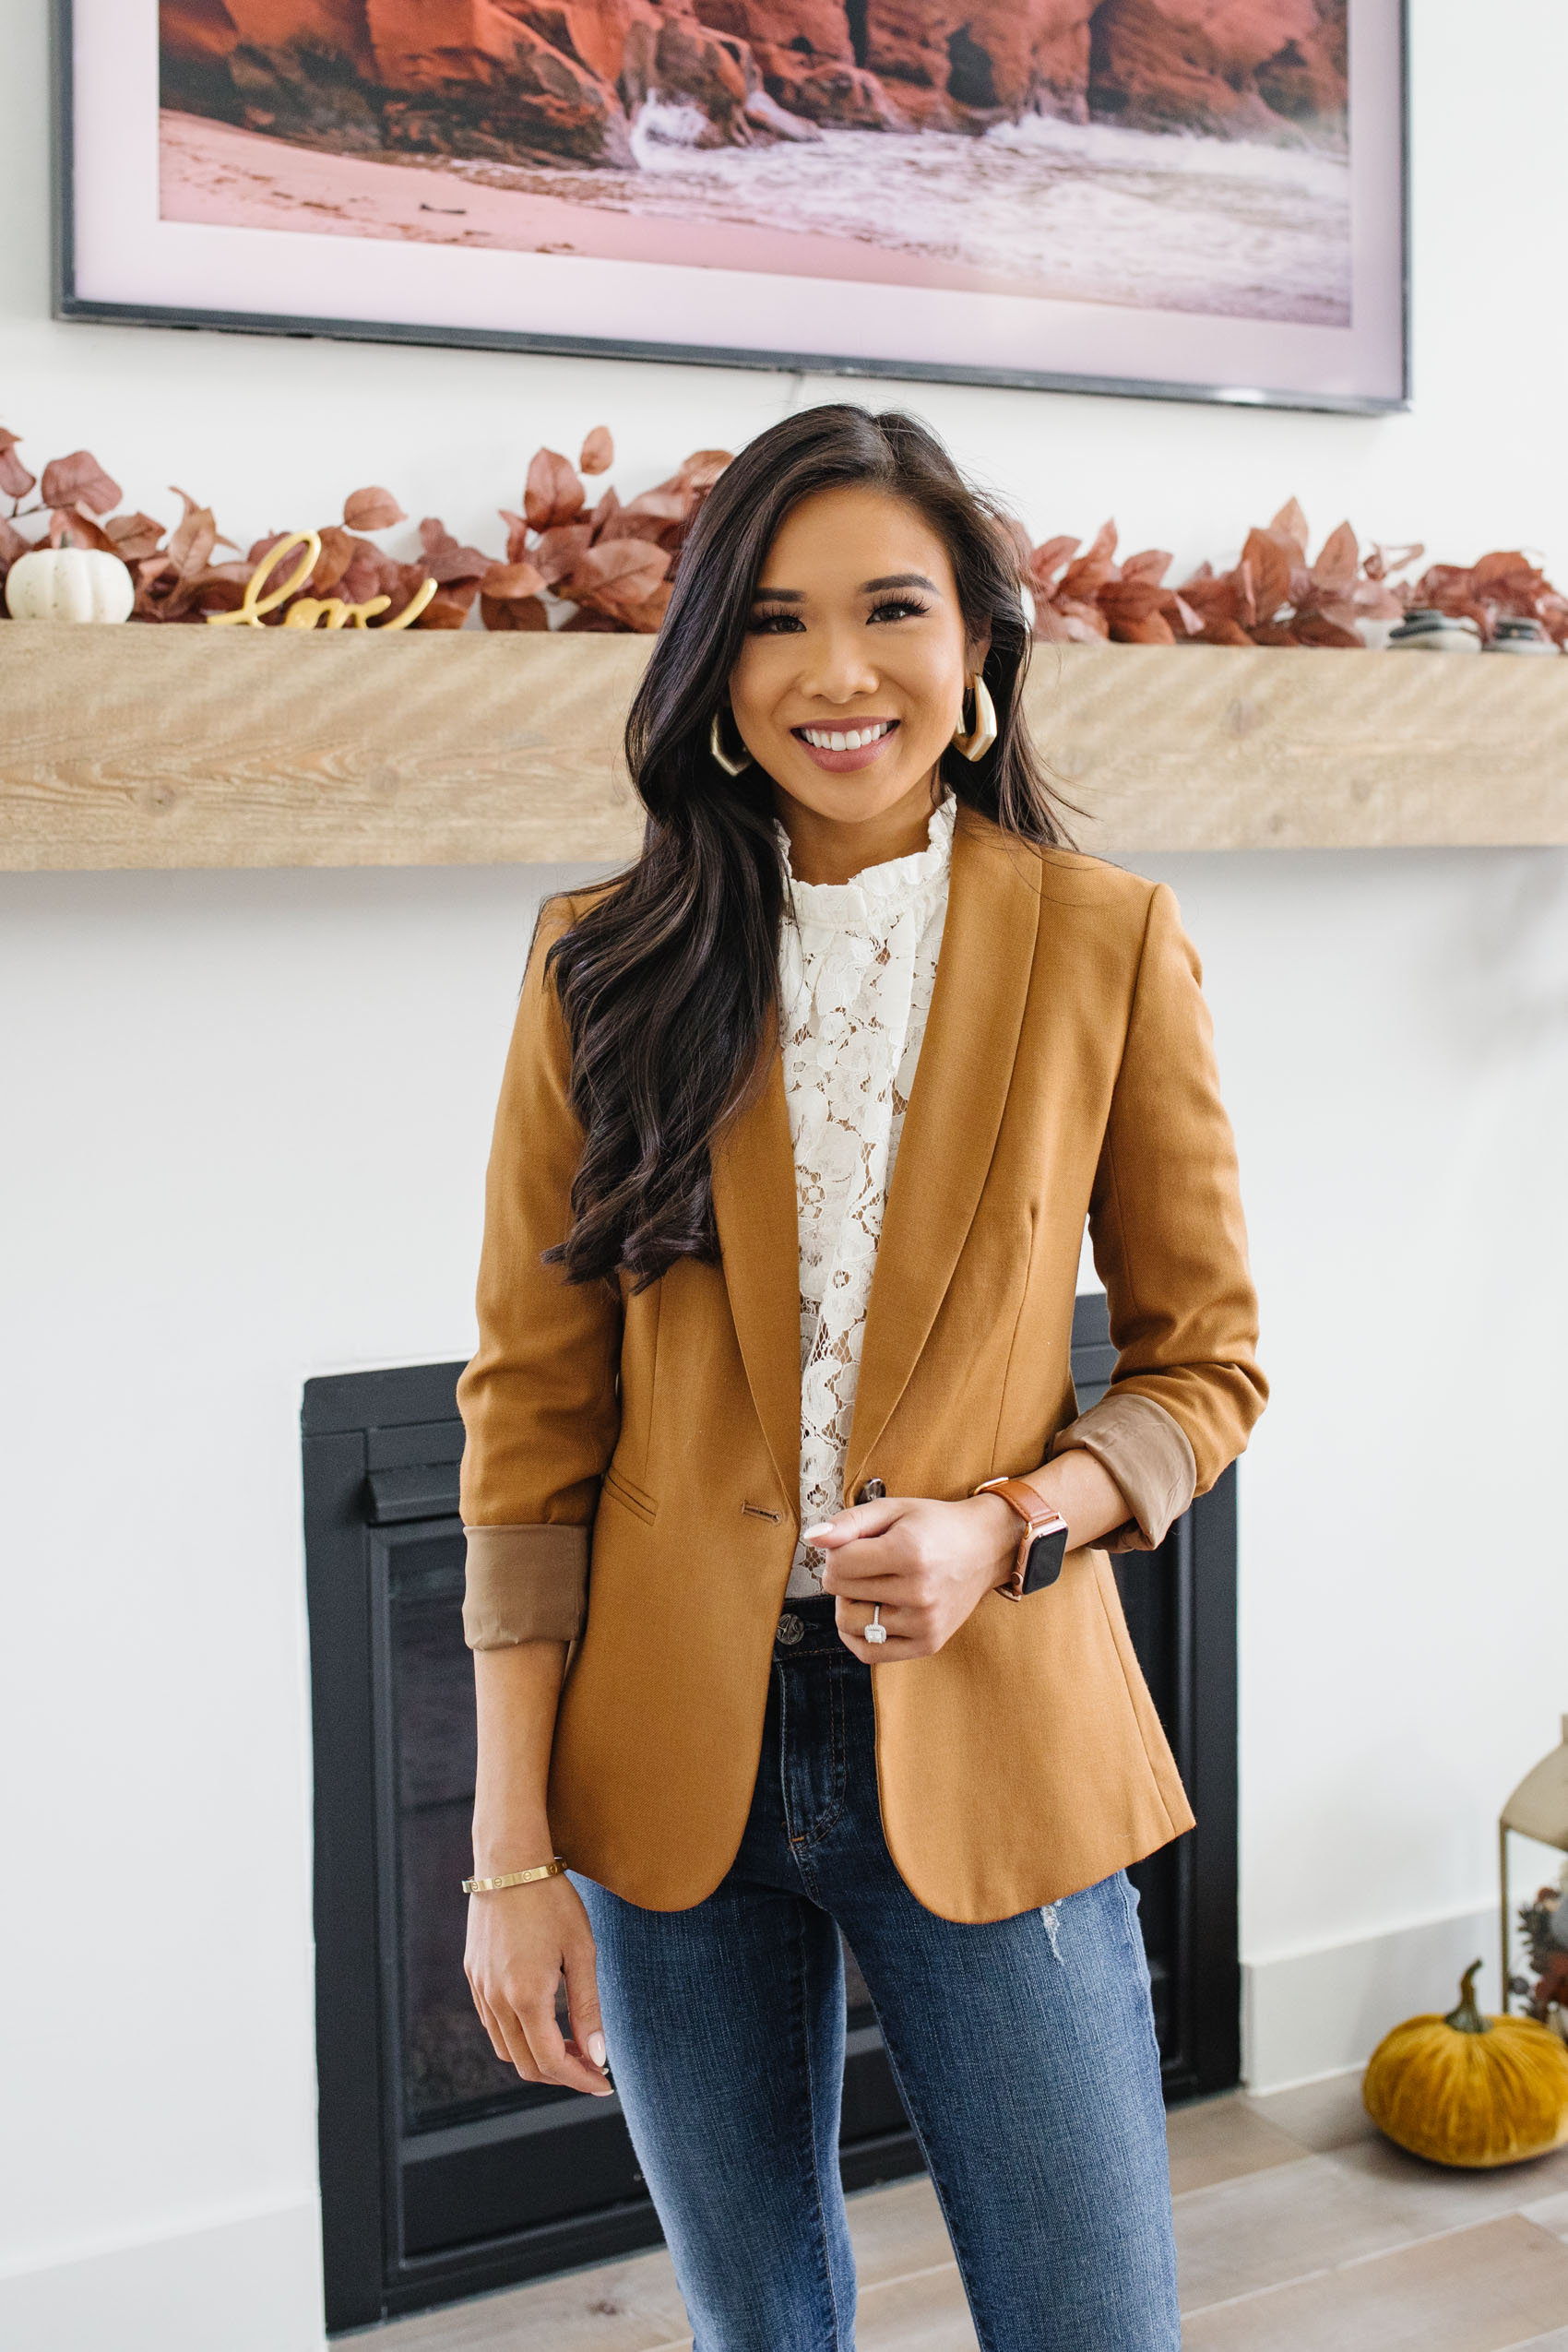 Blogger Hoang-Kim wearing a WAYF lace top, J.Crew Parke blazer, AG Jeans, Kendra Scott earrings for a fall outfit